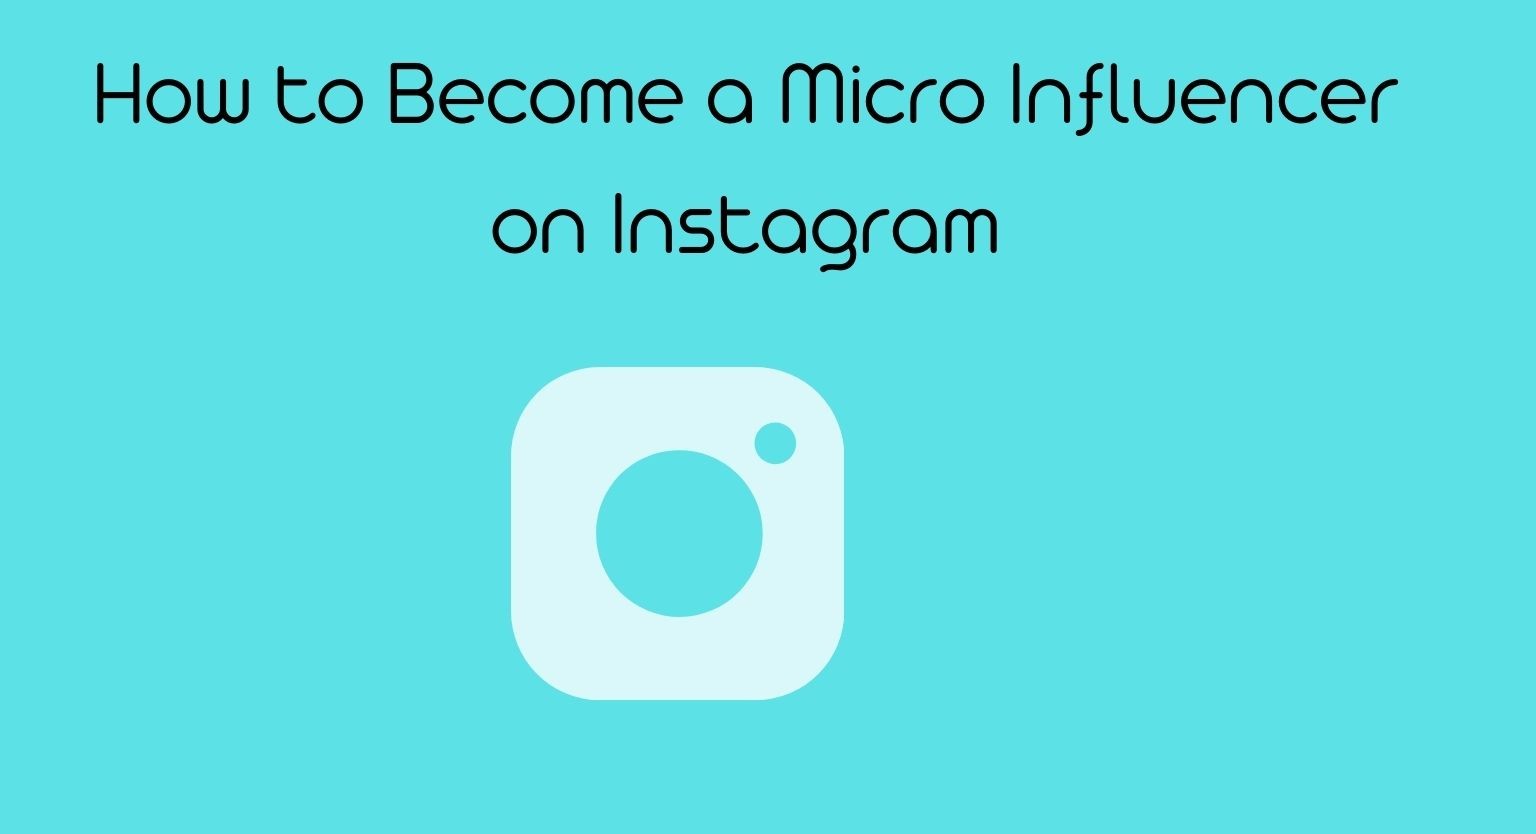 How to Become a Micro Influencer on Instagram